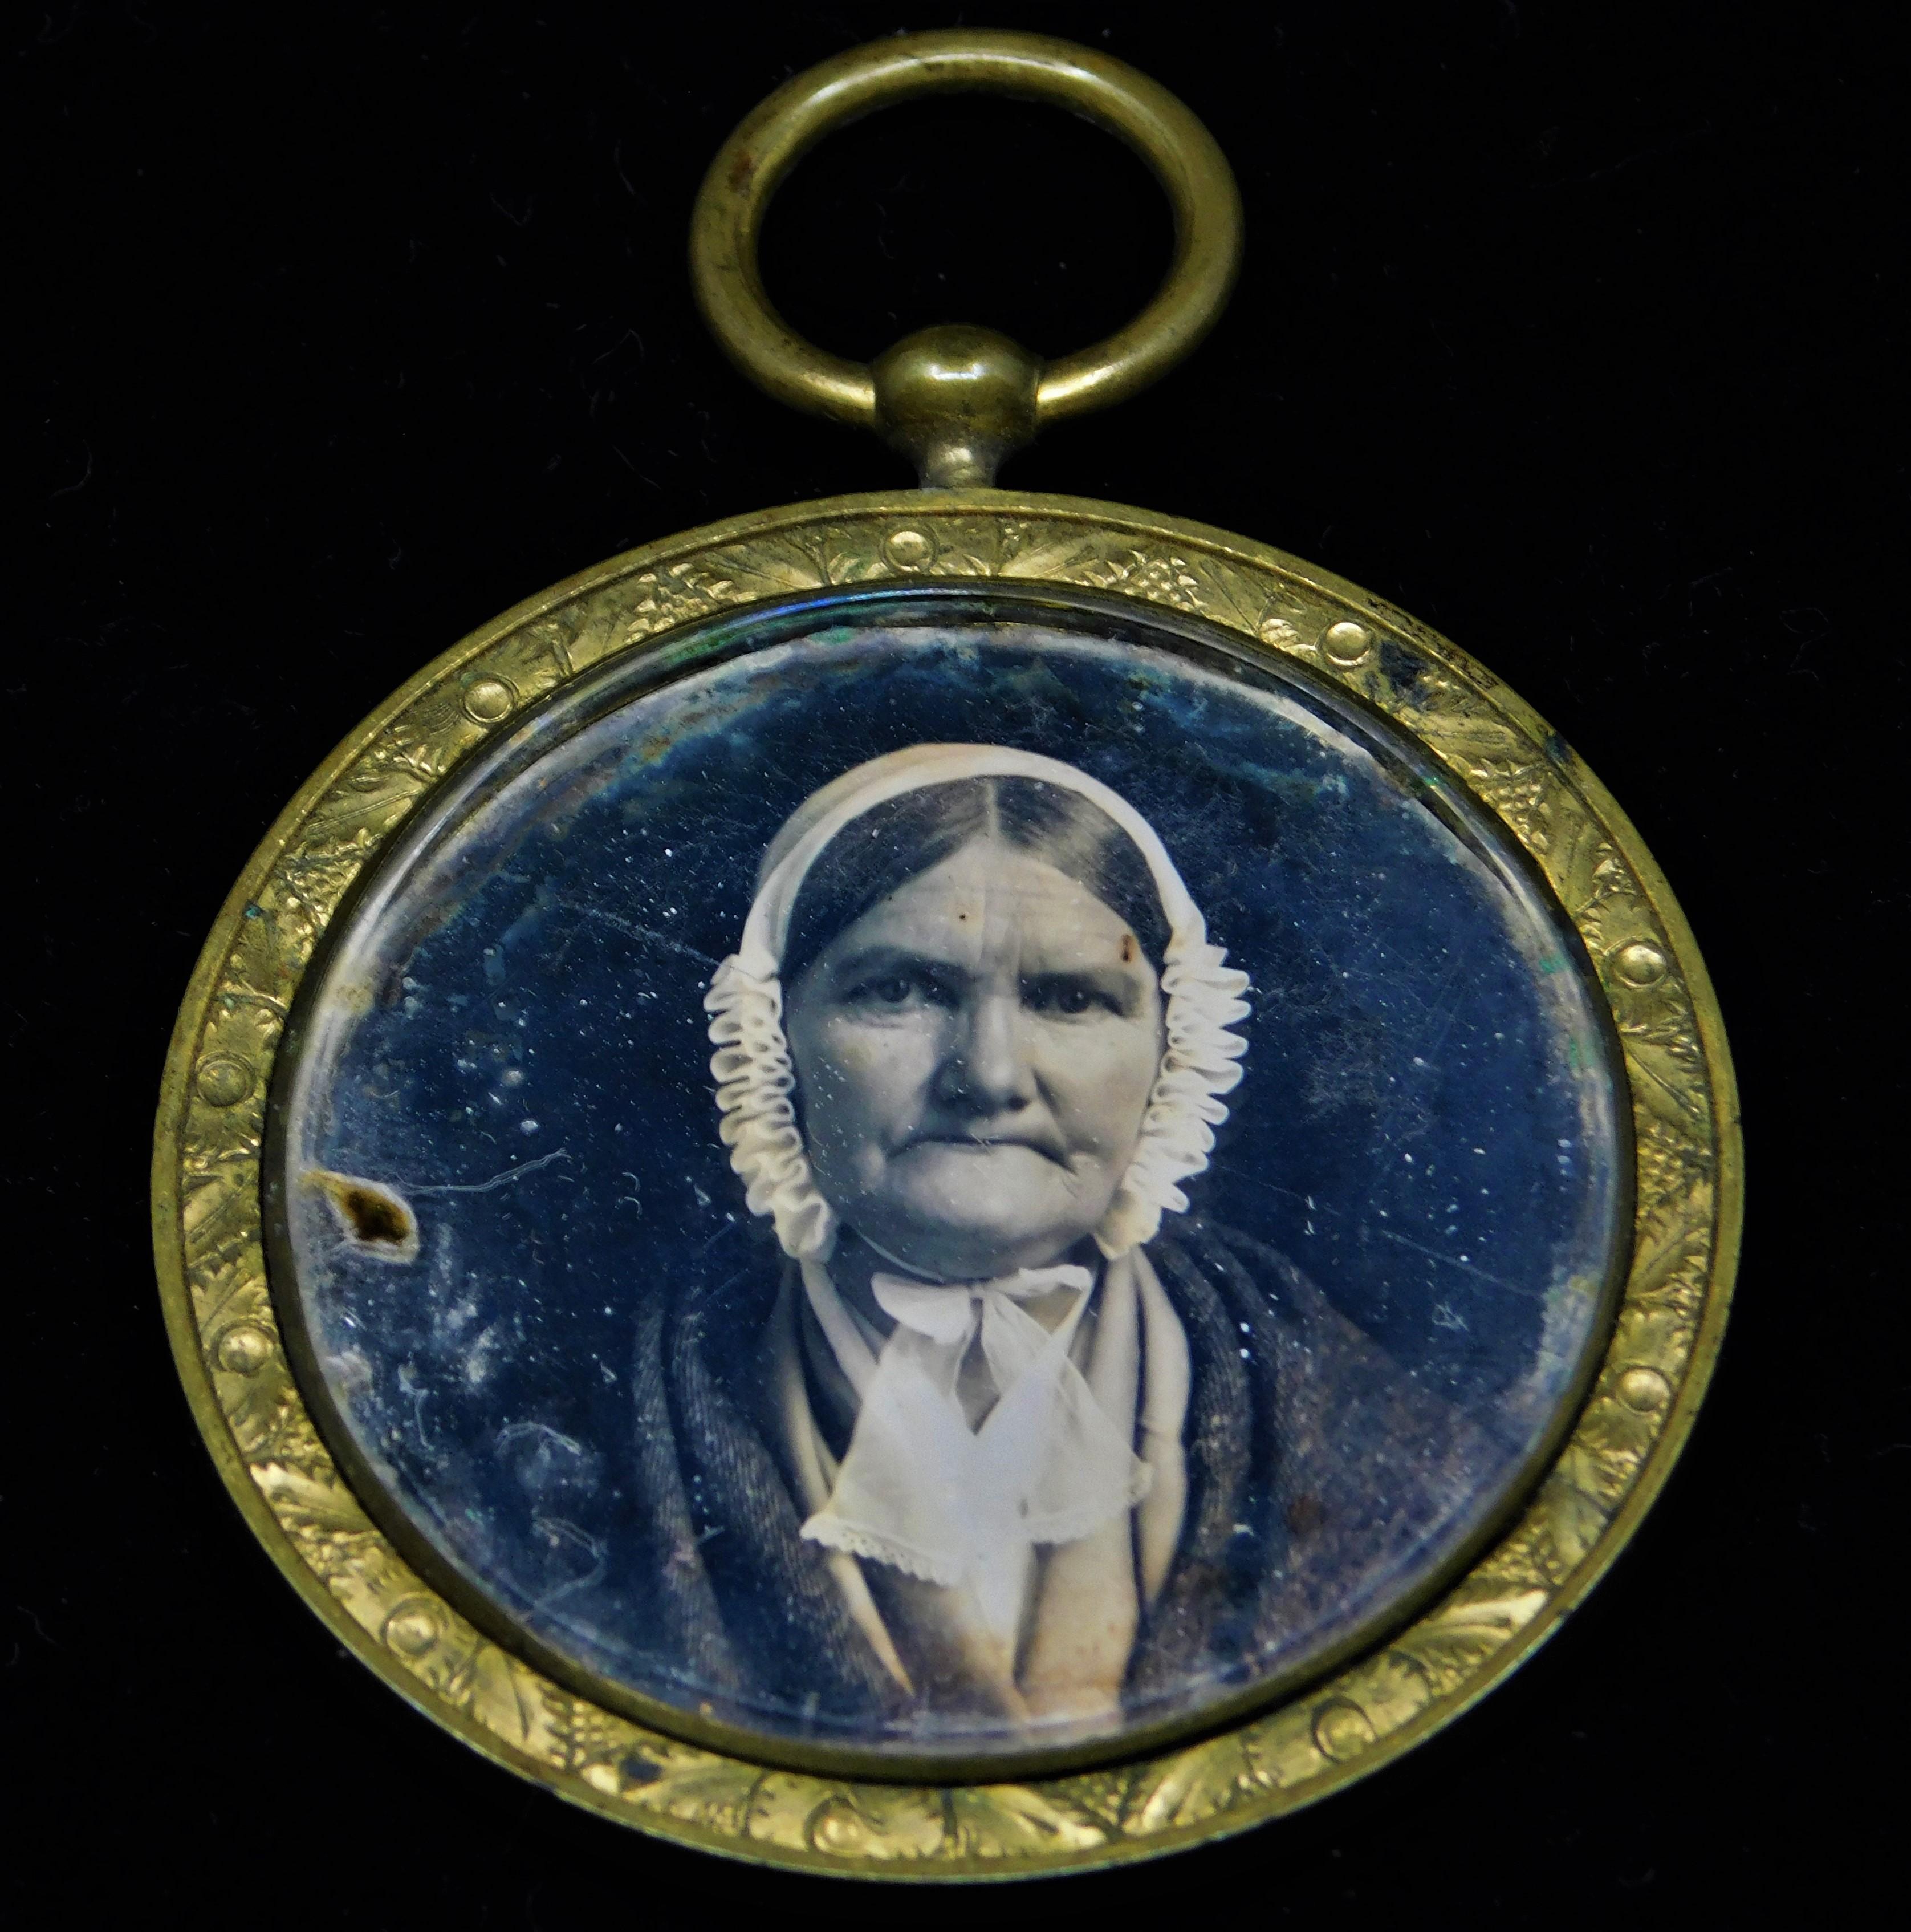 Exceptional early Victorian daguerreotype image of an older woman. Dating to the 1840s. Daguerreotypes offer the best image quality almost haunting. The image is housed in a pocket watch case original to it’s manufacture. would have been worn on a